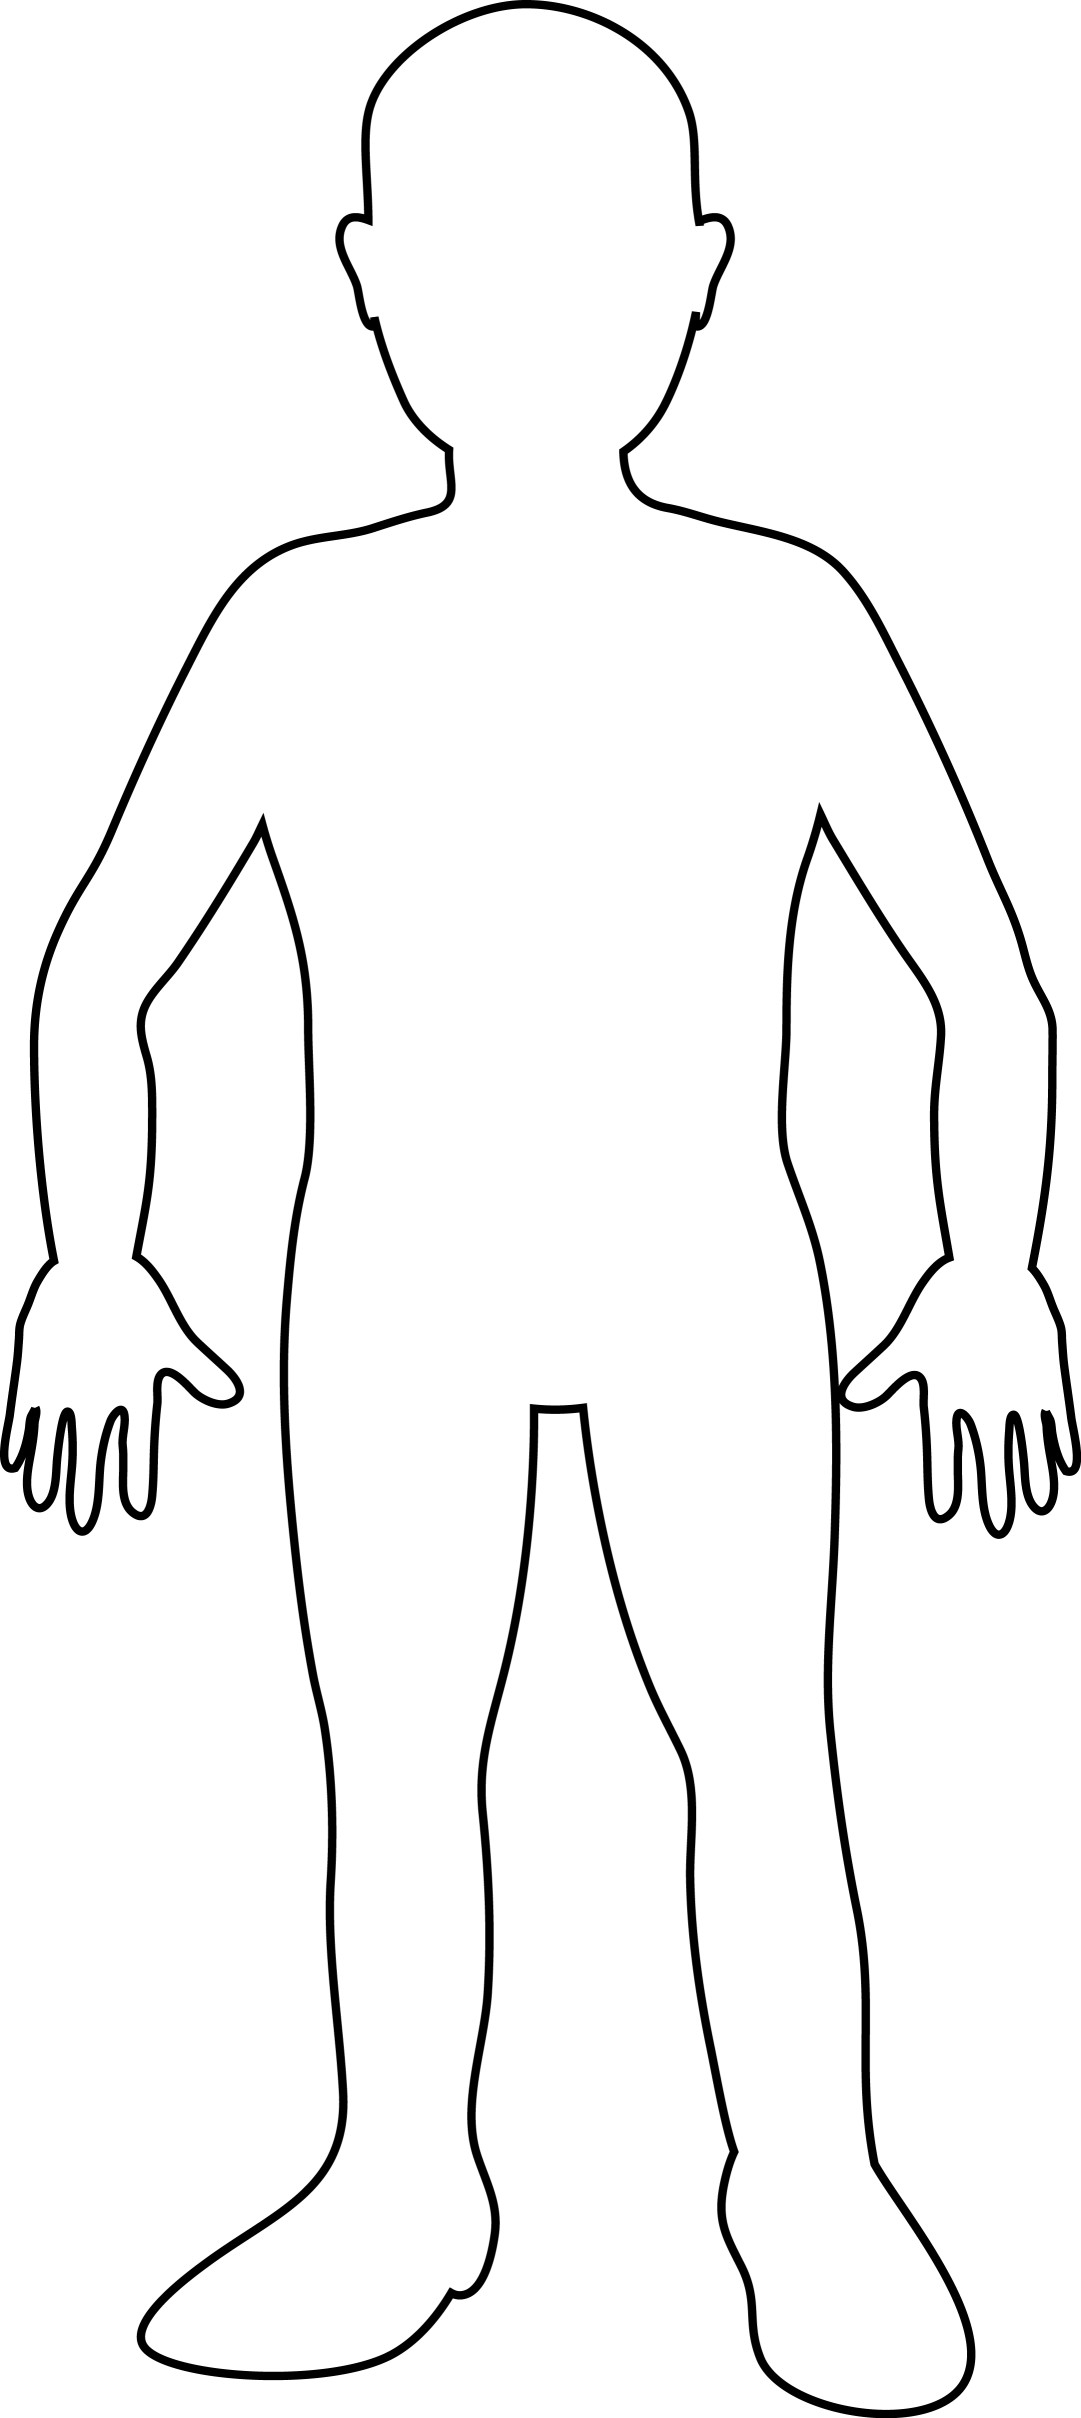 clipart of a human body - photo #46